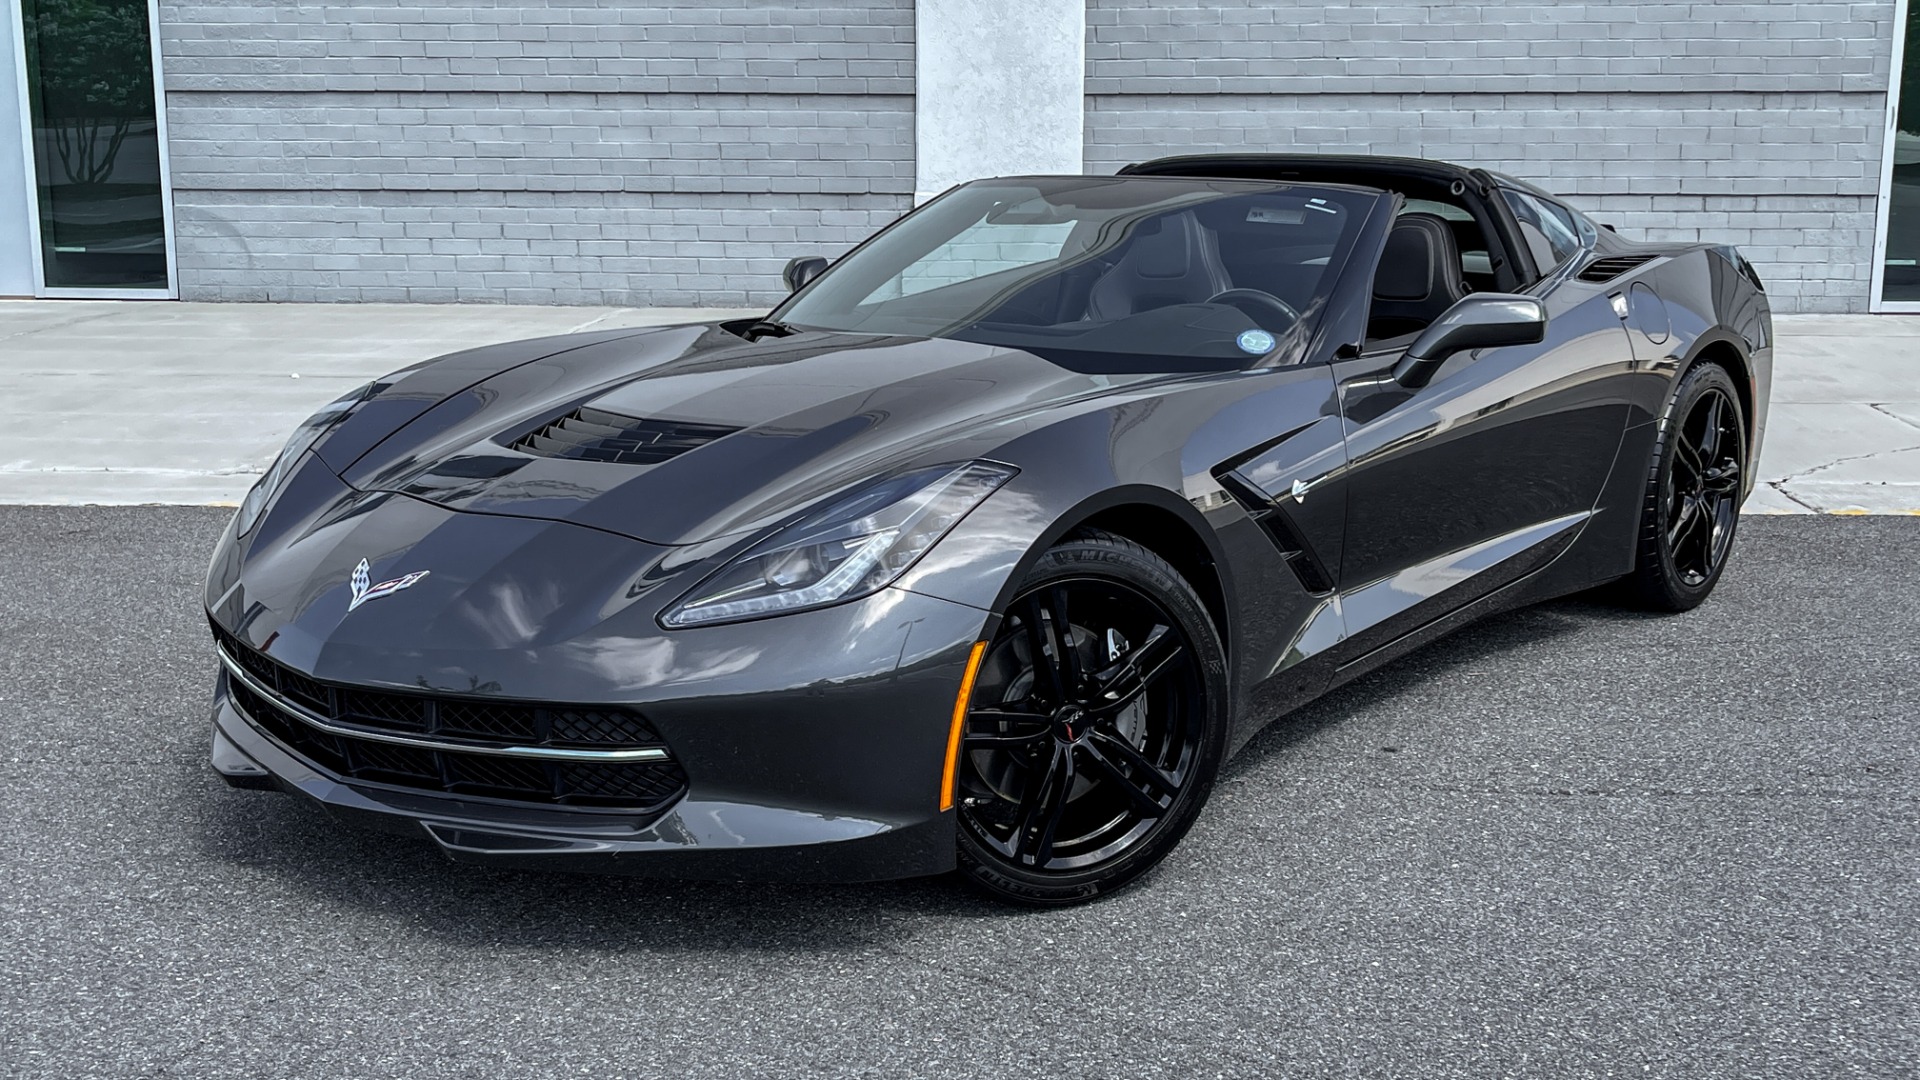 Used 2017 Chevrolet Corvette 1LT / 8SPD AUTO / 6.2L V8 / REMOTE START / PADDLE SHIFTERS for sale $52,995 at Formula Imports in Charlotte NC 28227 56